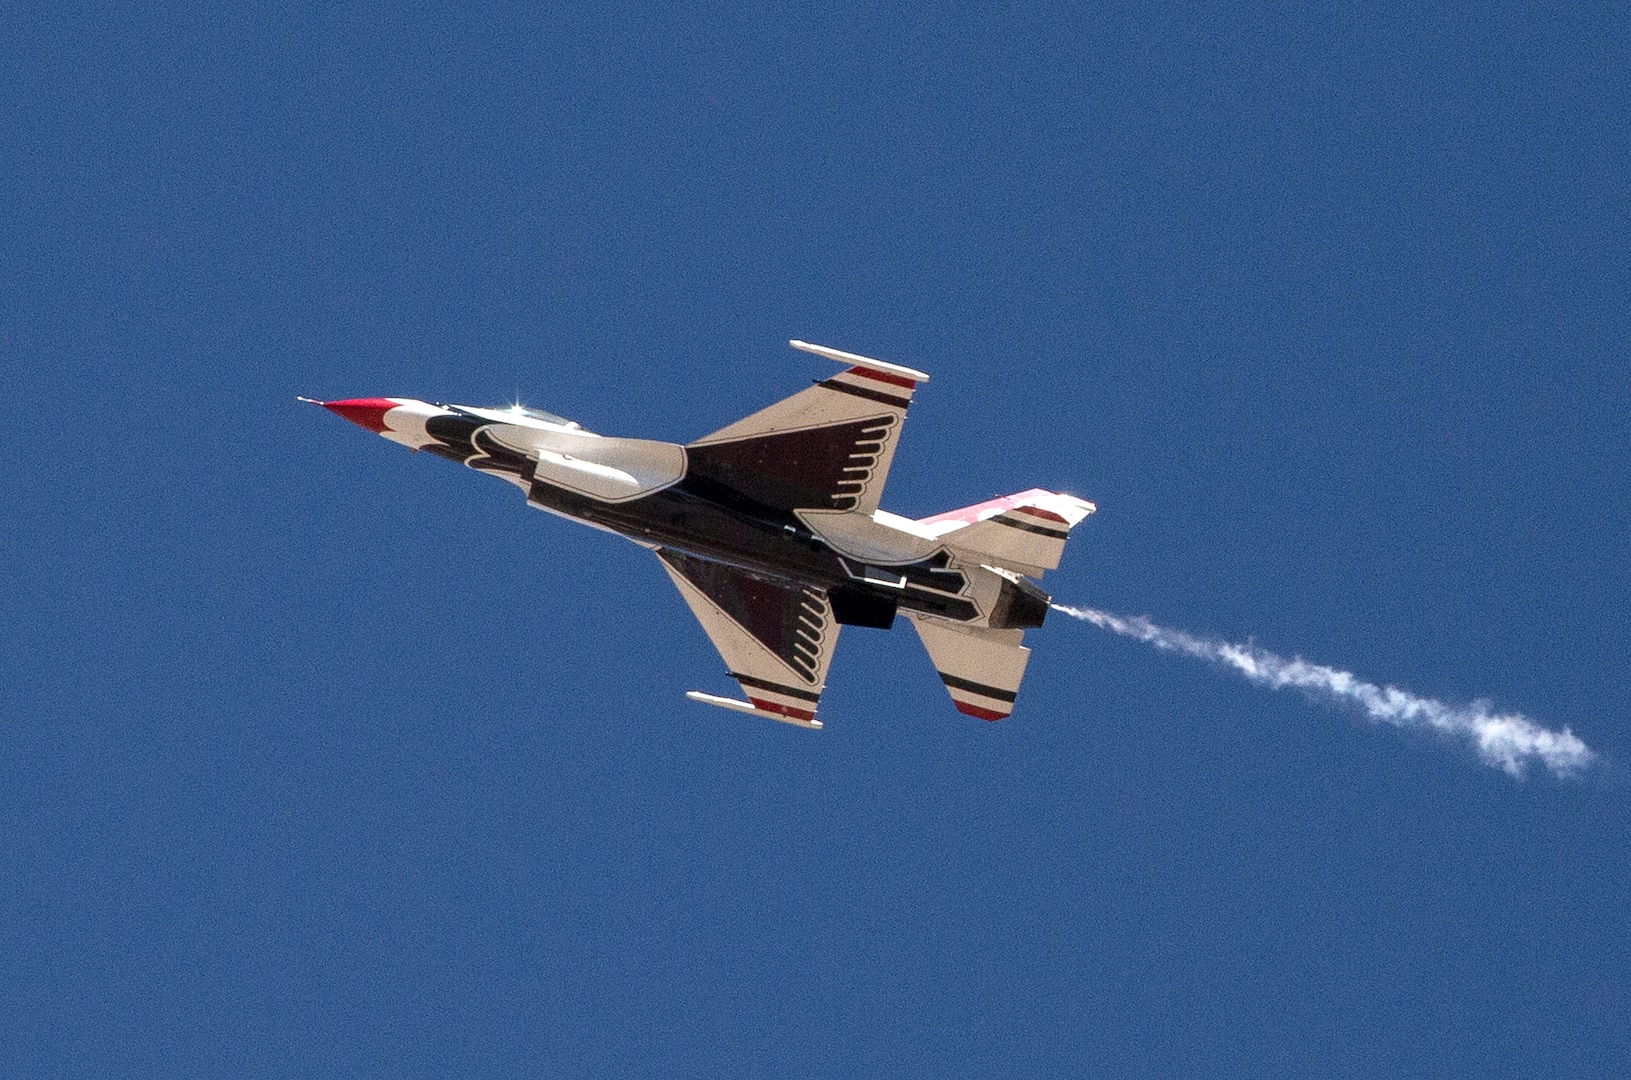 The U.S. Air Force Aerial Demonstration Squadron “Thunderbirds” practice performing F-16 acrobatic maneuvers Oct. 26, 2015 at Joint Base San Antonio-Randolph, Texas. The Thunderbirds team members arrived in preparation for the 2015 JBSA-Randolph Air Show and Open House to be held Oct. 31 and Nov. 1.  Air shows allow the Air Force to display the capabilities of our aircraft to the American taxpayer through aerial demonstrations and static displays and allowing attendees to get up close and personal to see some of the equipment and aircraft used by the U.S. military today.  (U.S. Air Force photo by Johnny Saldivar/Released)